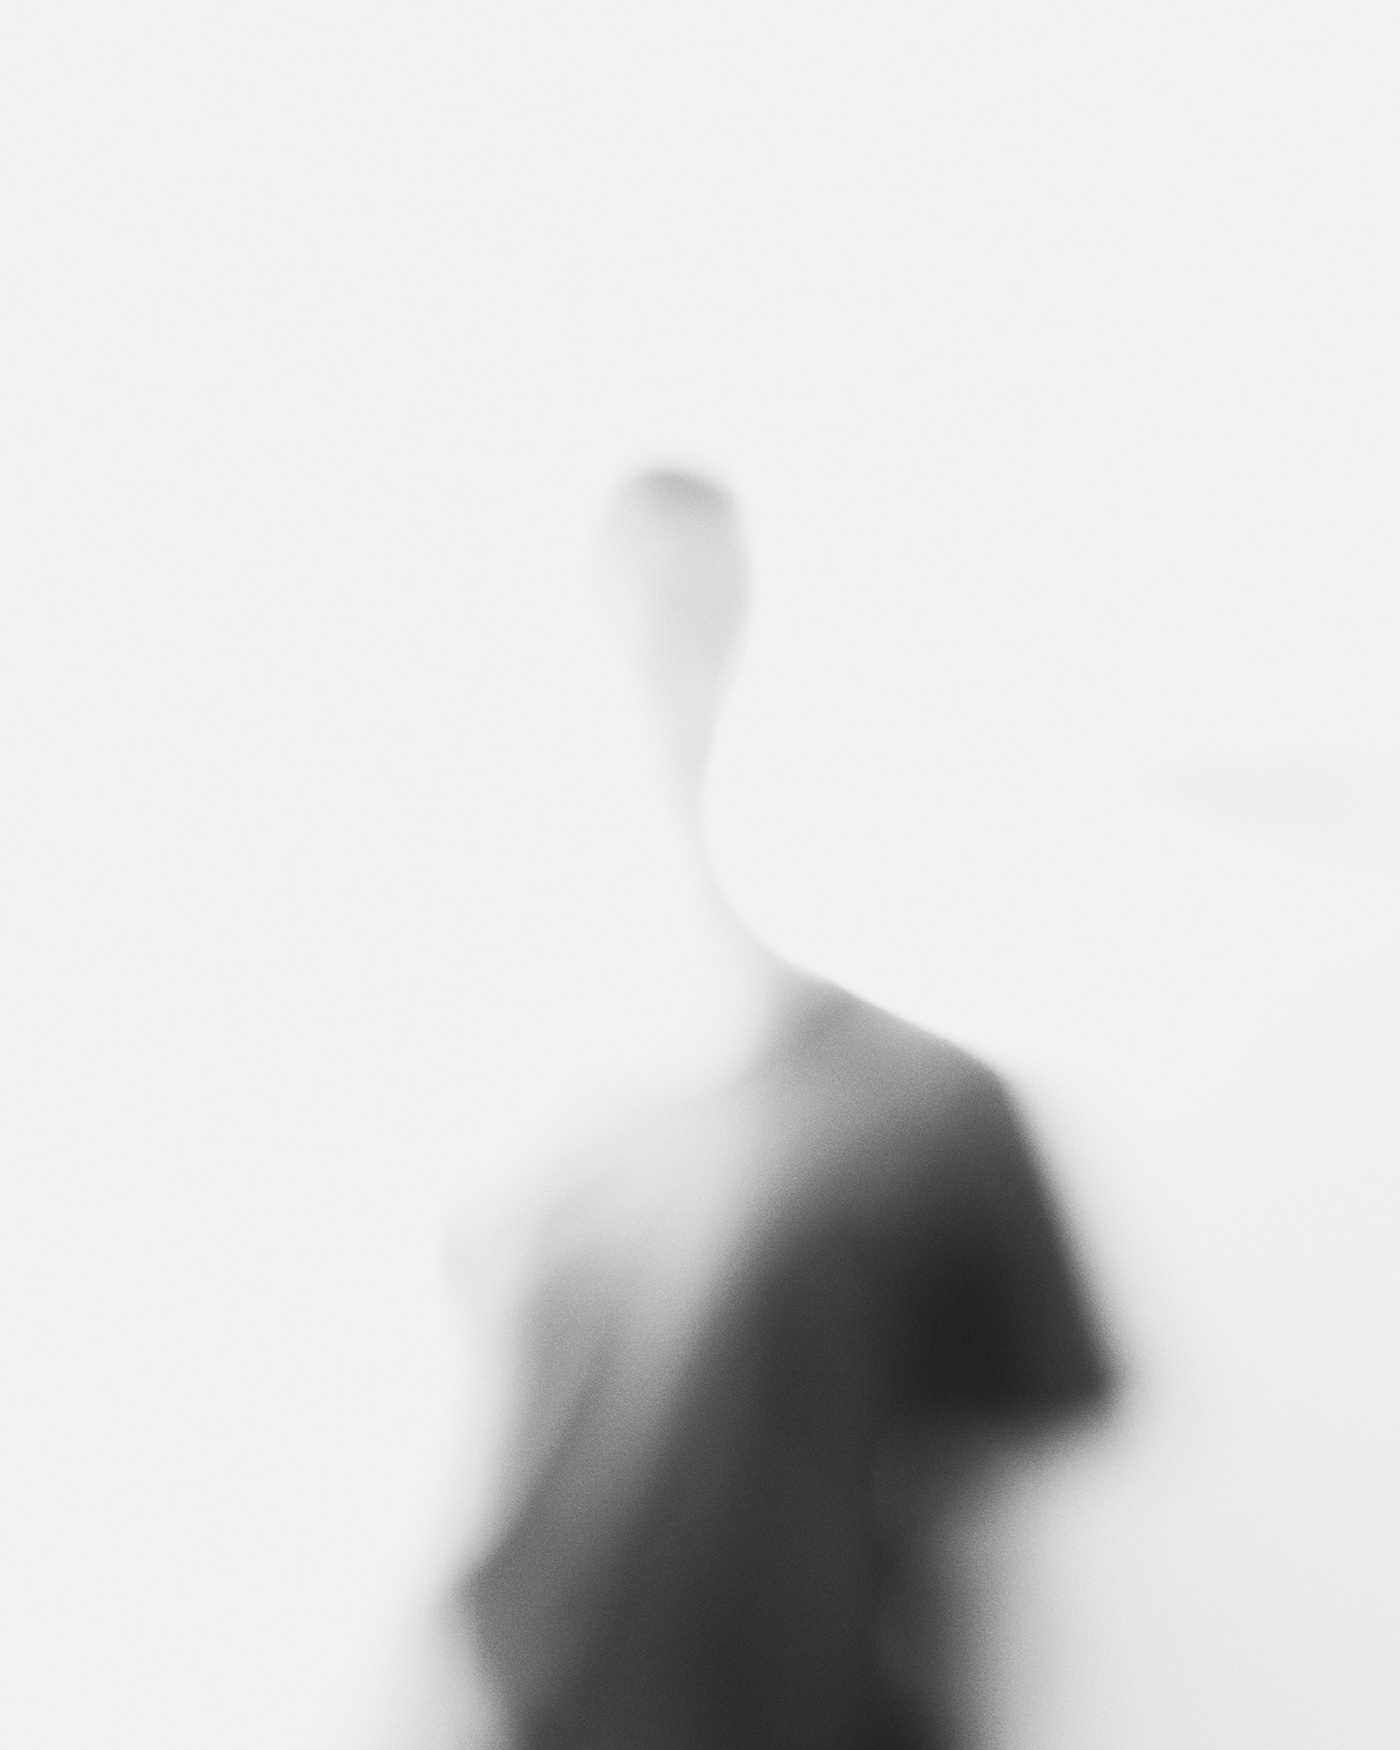 abstract blackandwhite Photography  portrait selfportrait